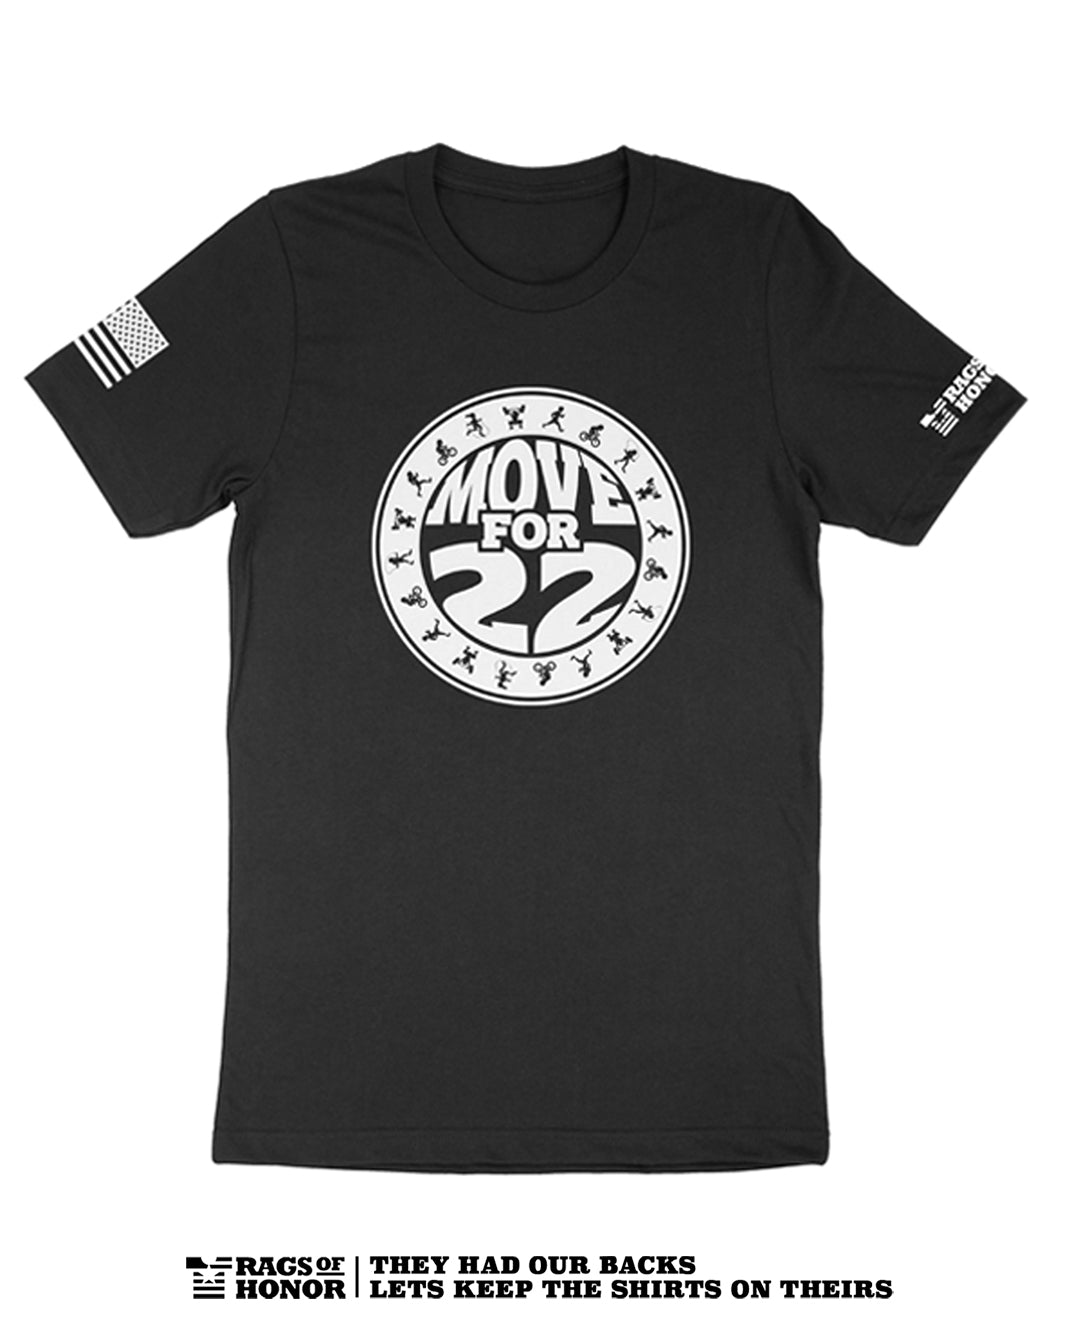 Move for 22 Unisex T-Shirt